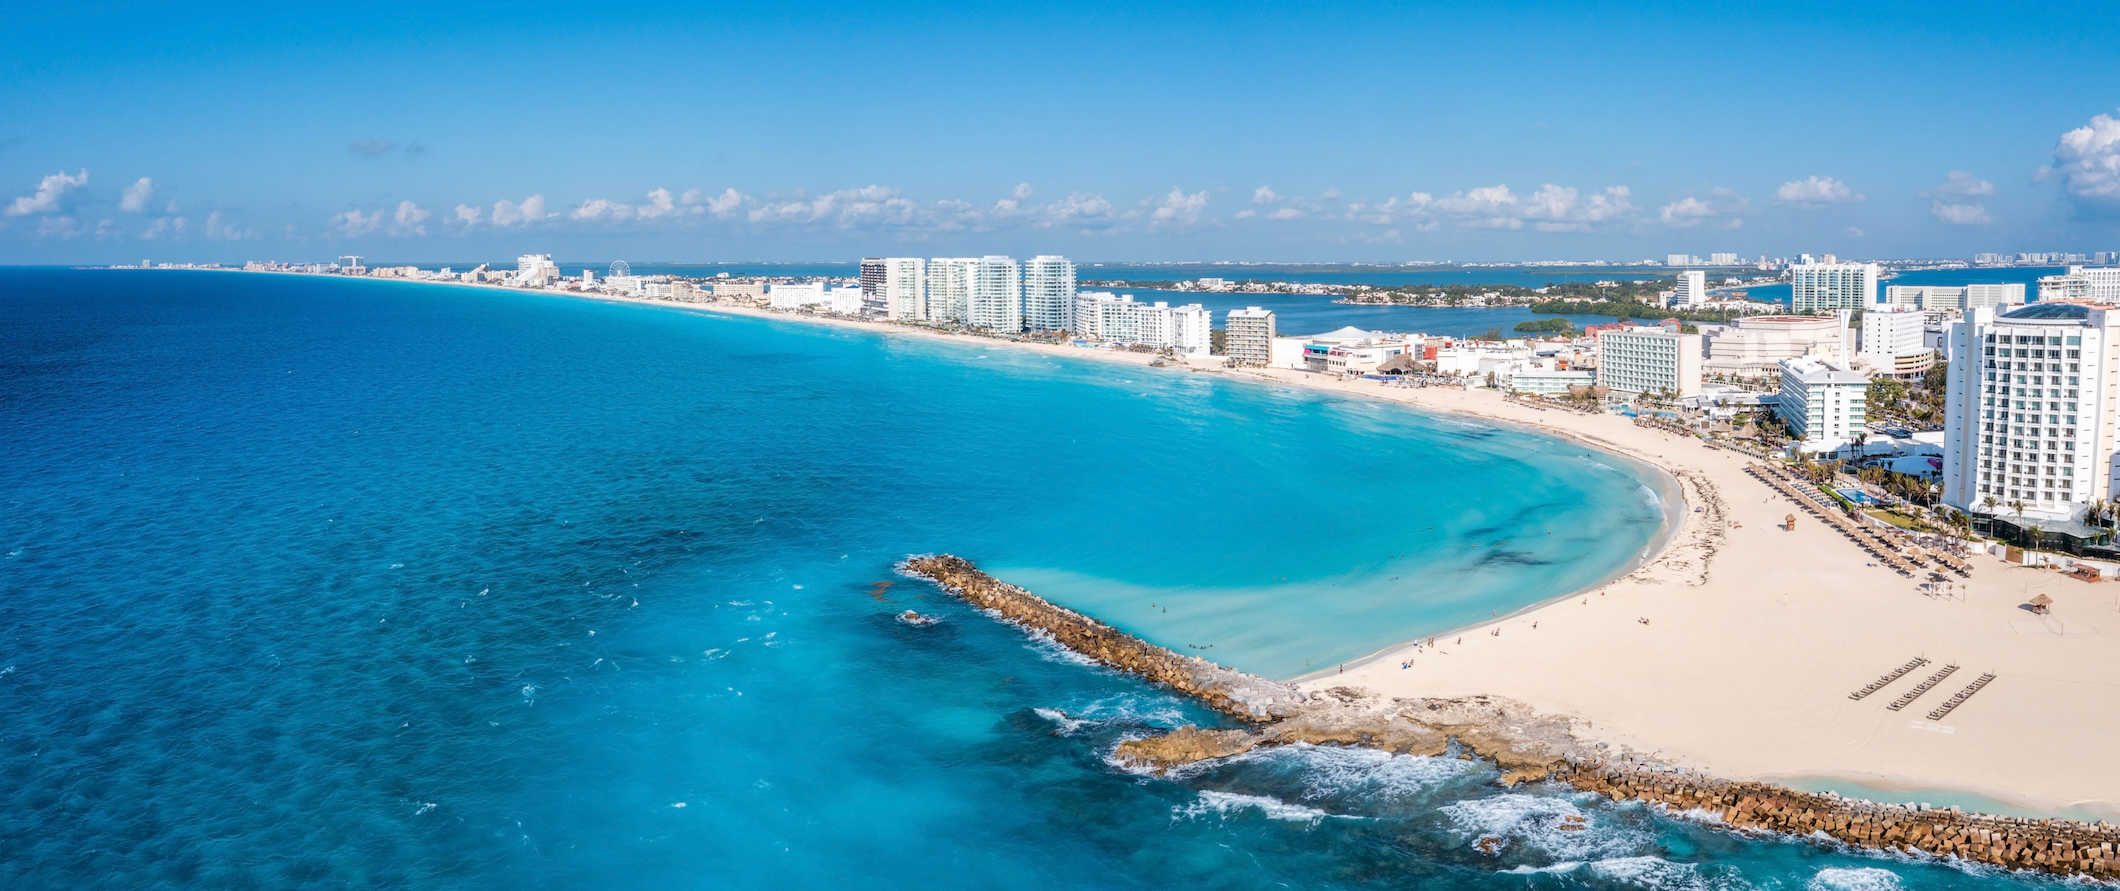 The stunning coast of sunny Cancun, Mexico with resorts along the water and boats in the ocean